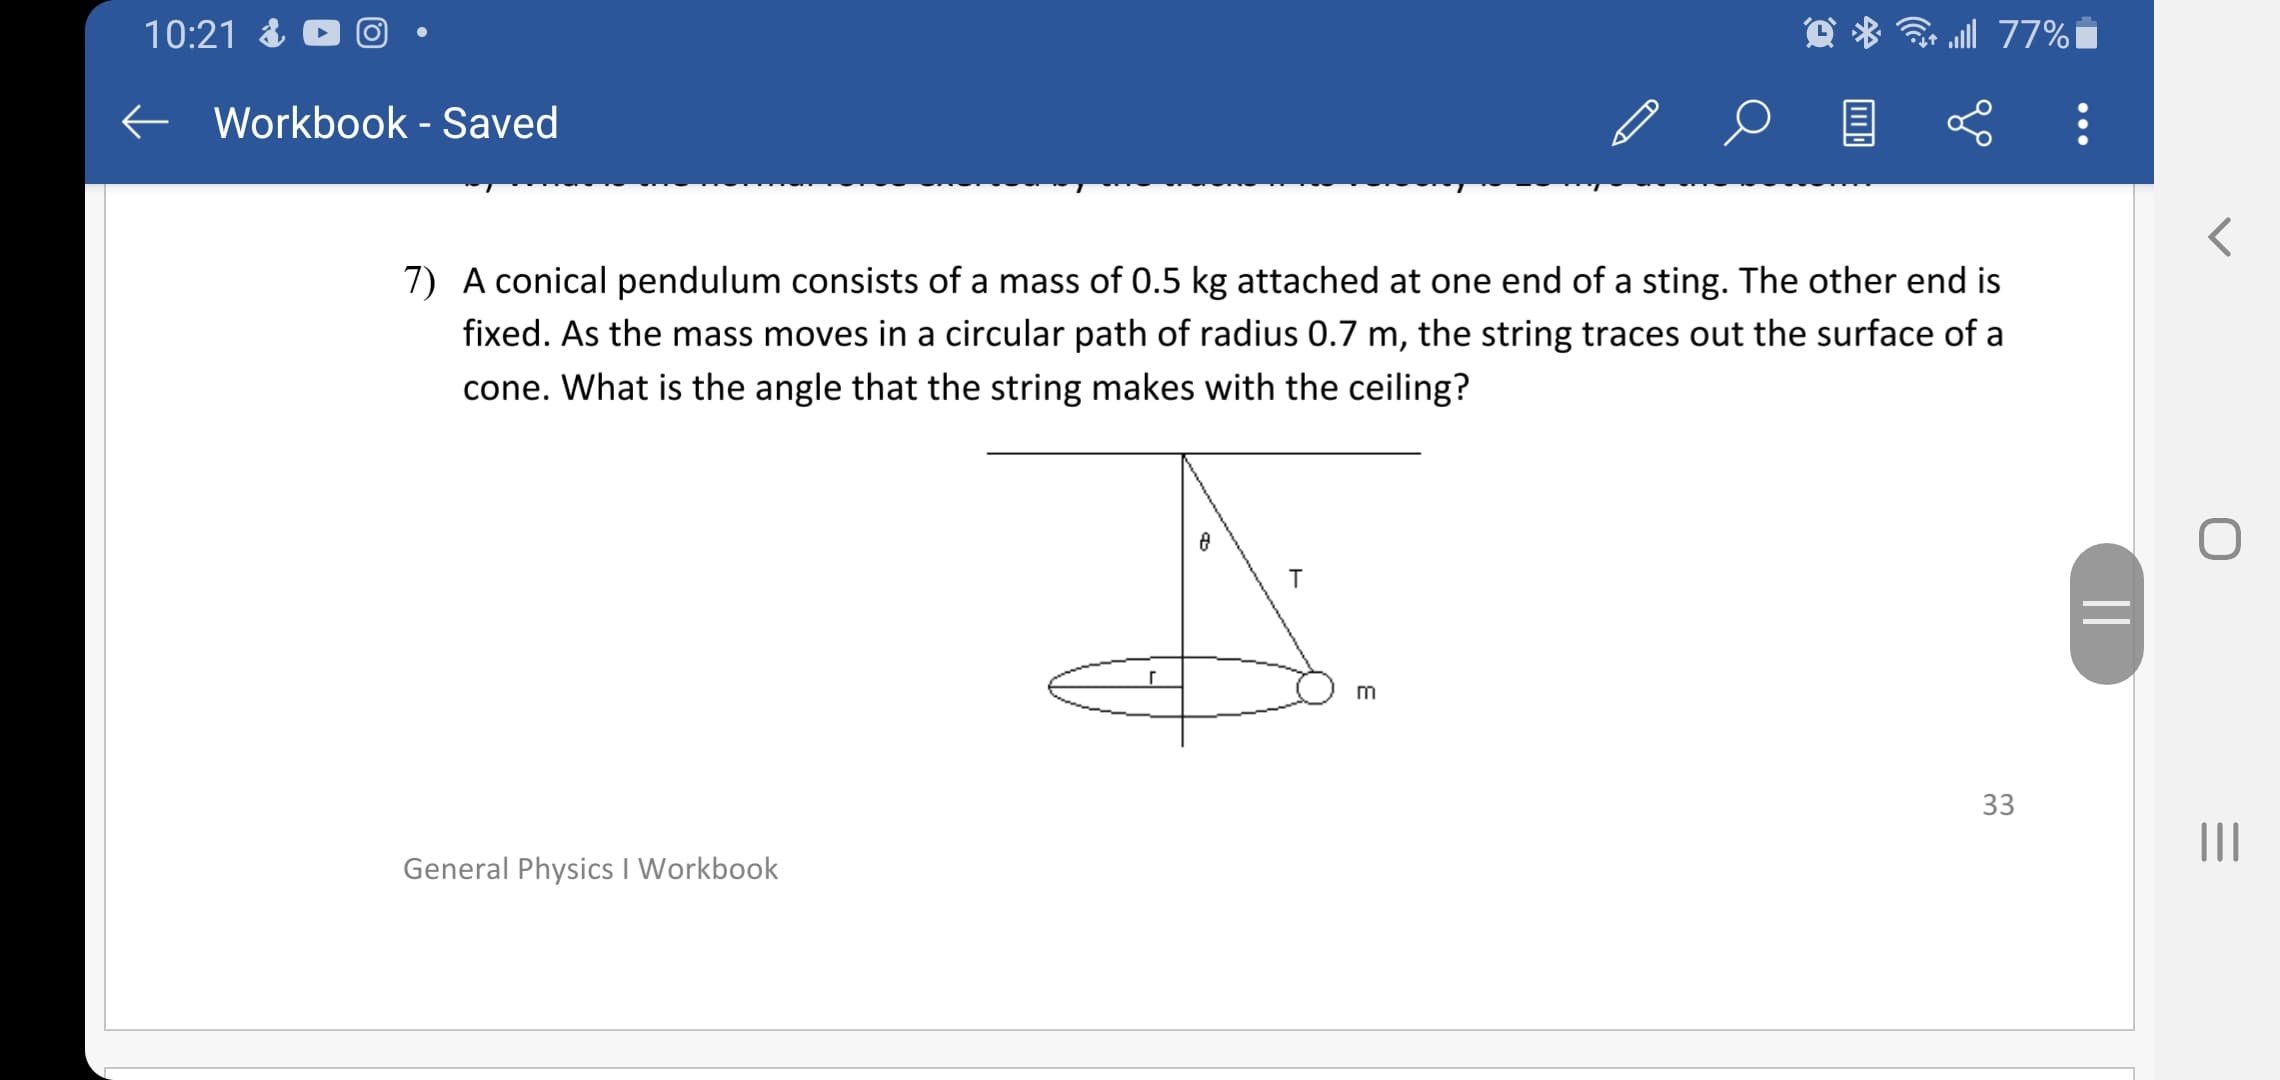 A conical pendulum consists of a mass of 0.5 kg attached at one end of a sting. The other end is
fixed. As the mass moves in a circular path of radius 0.7 m, the string traces out the surface of a
cone. What is the angle that the string makes with the ceiling?
